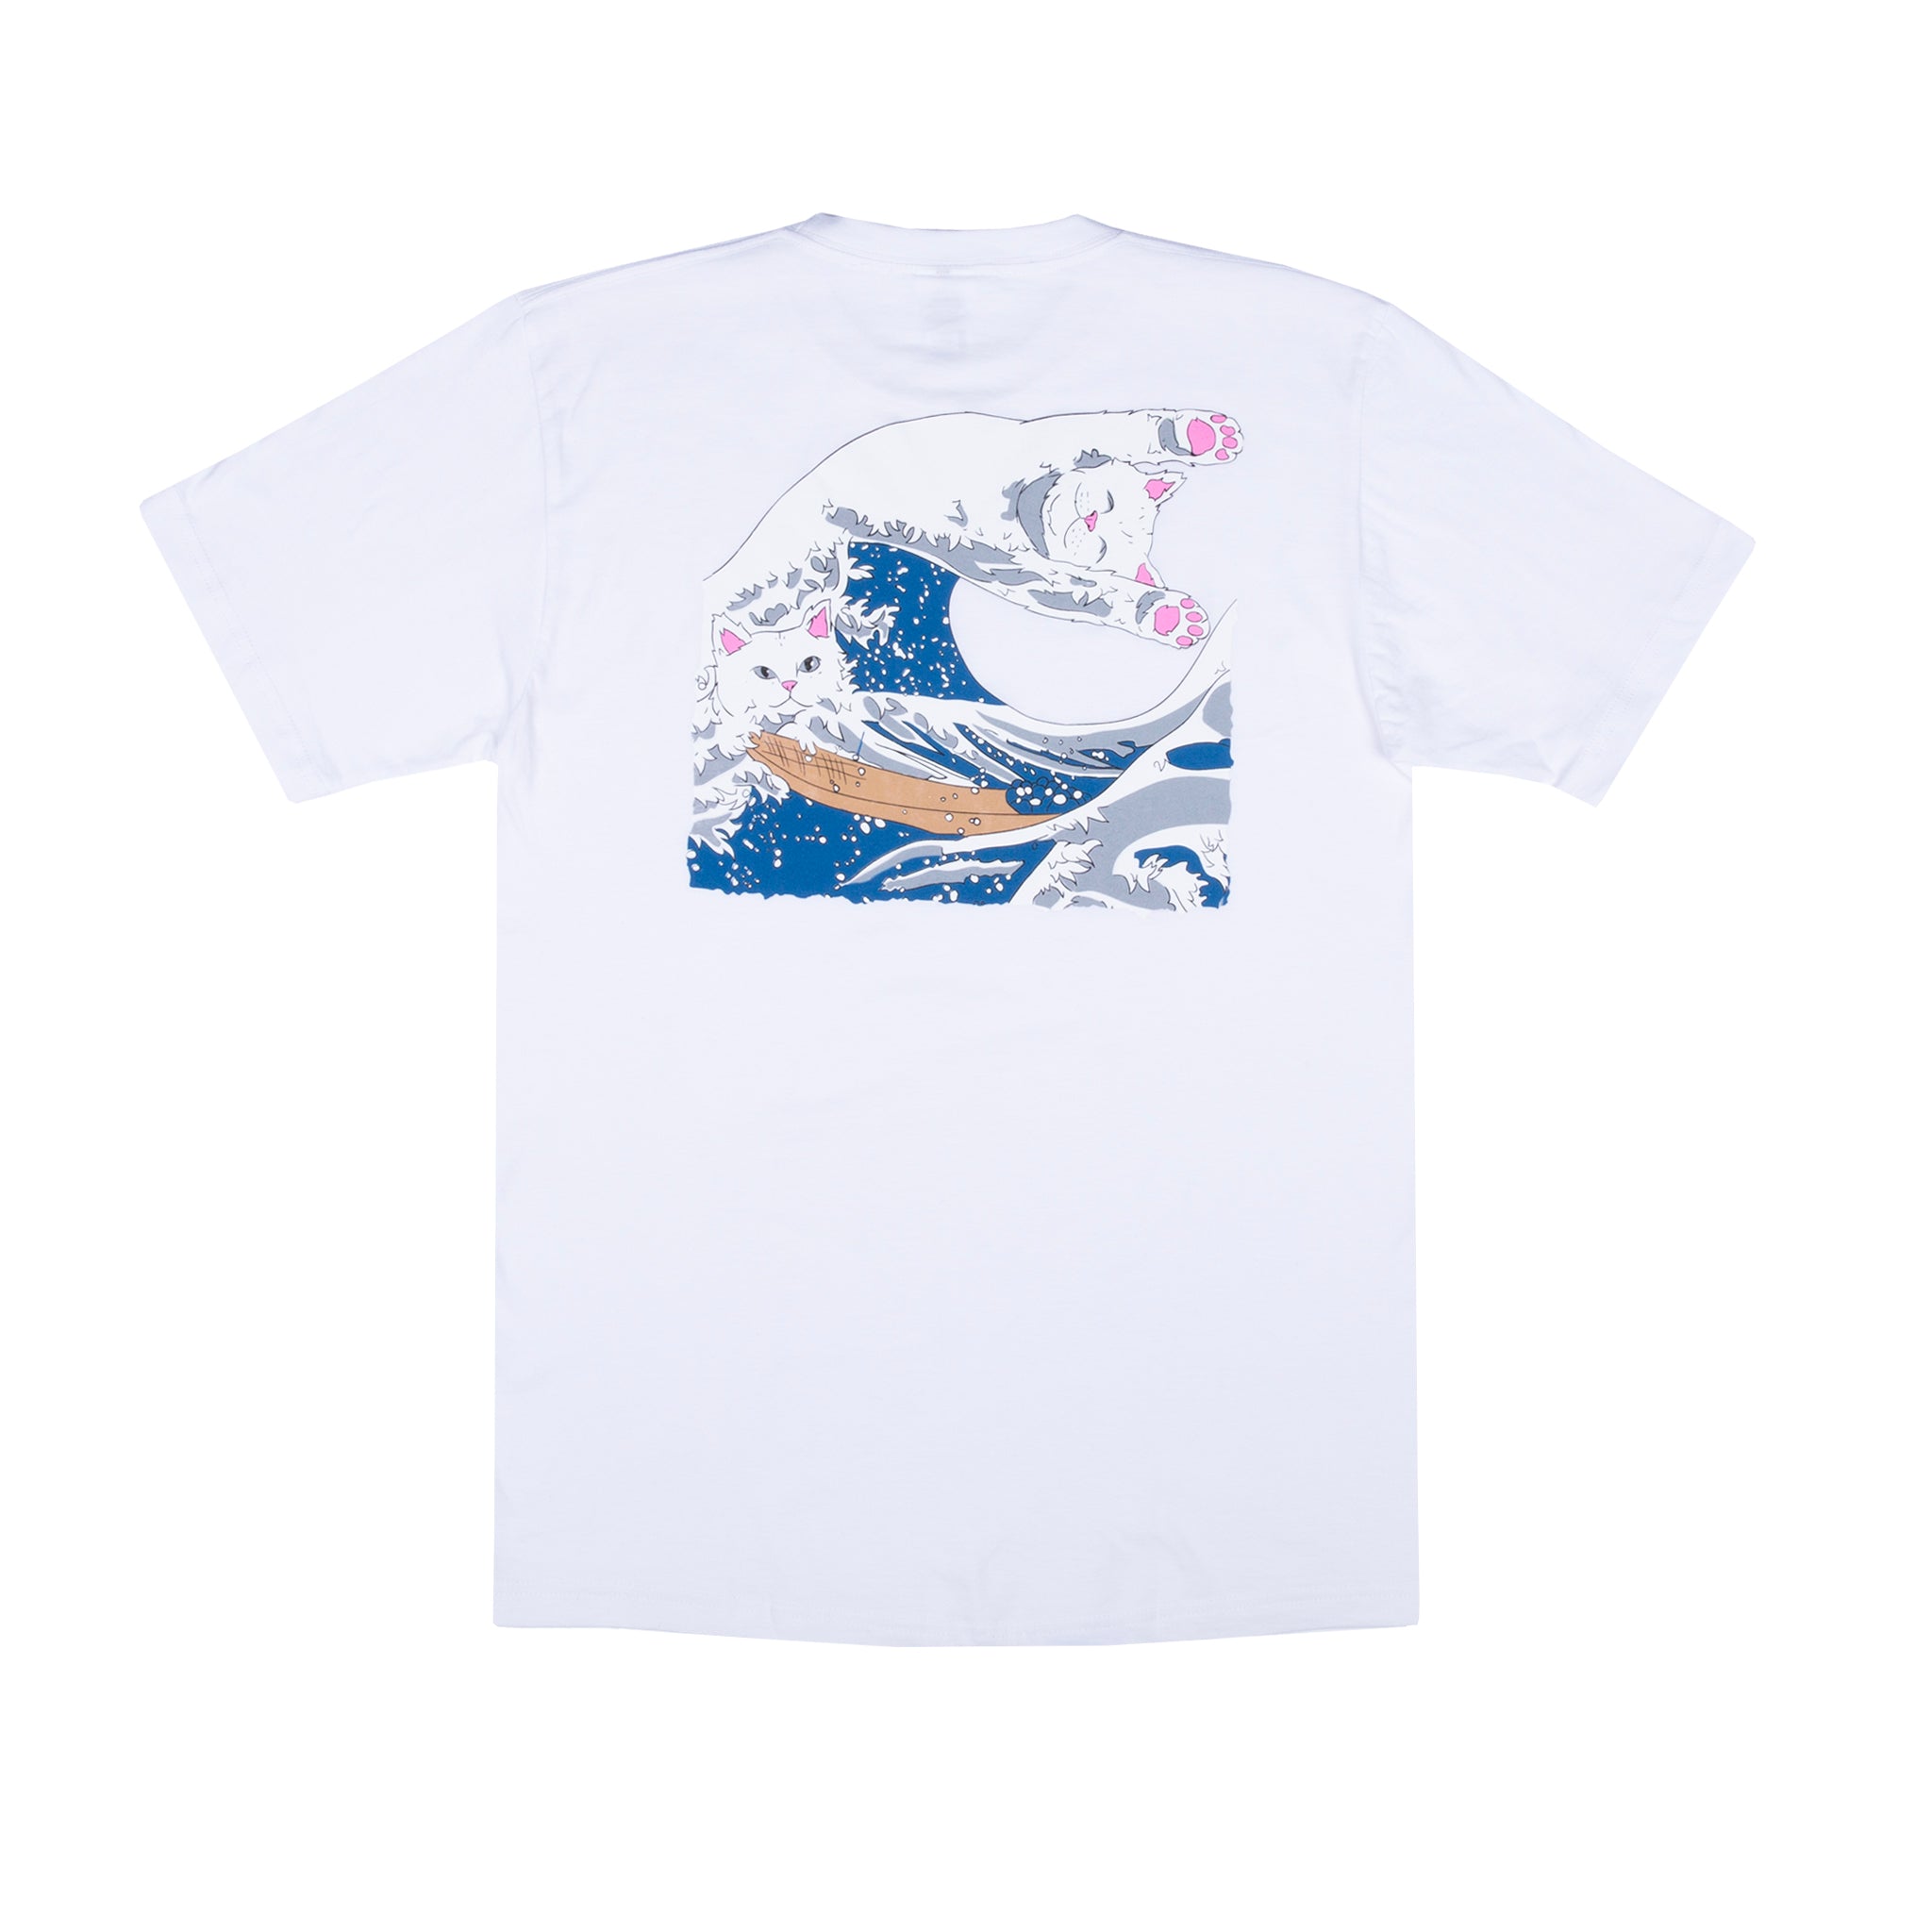 RipNDip The Great Wave Of Nerm Tee (White)